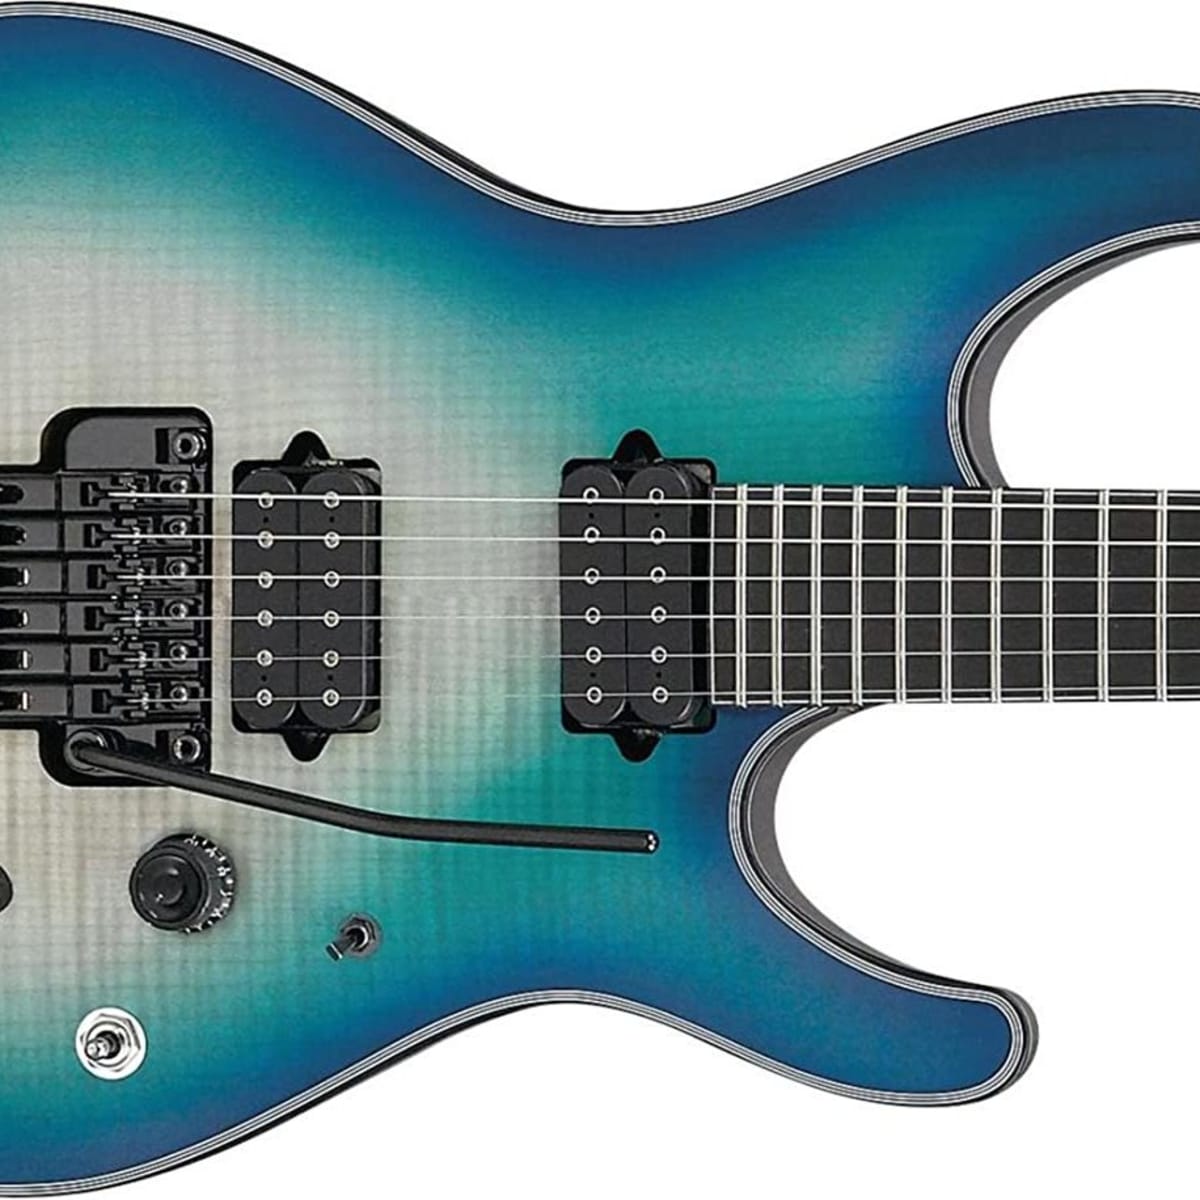 Ibanez RG vs. S Series: What's the Difference and Which Is Better